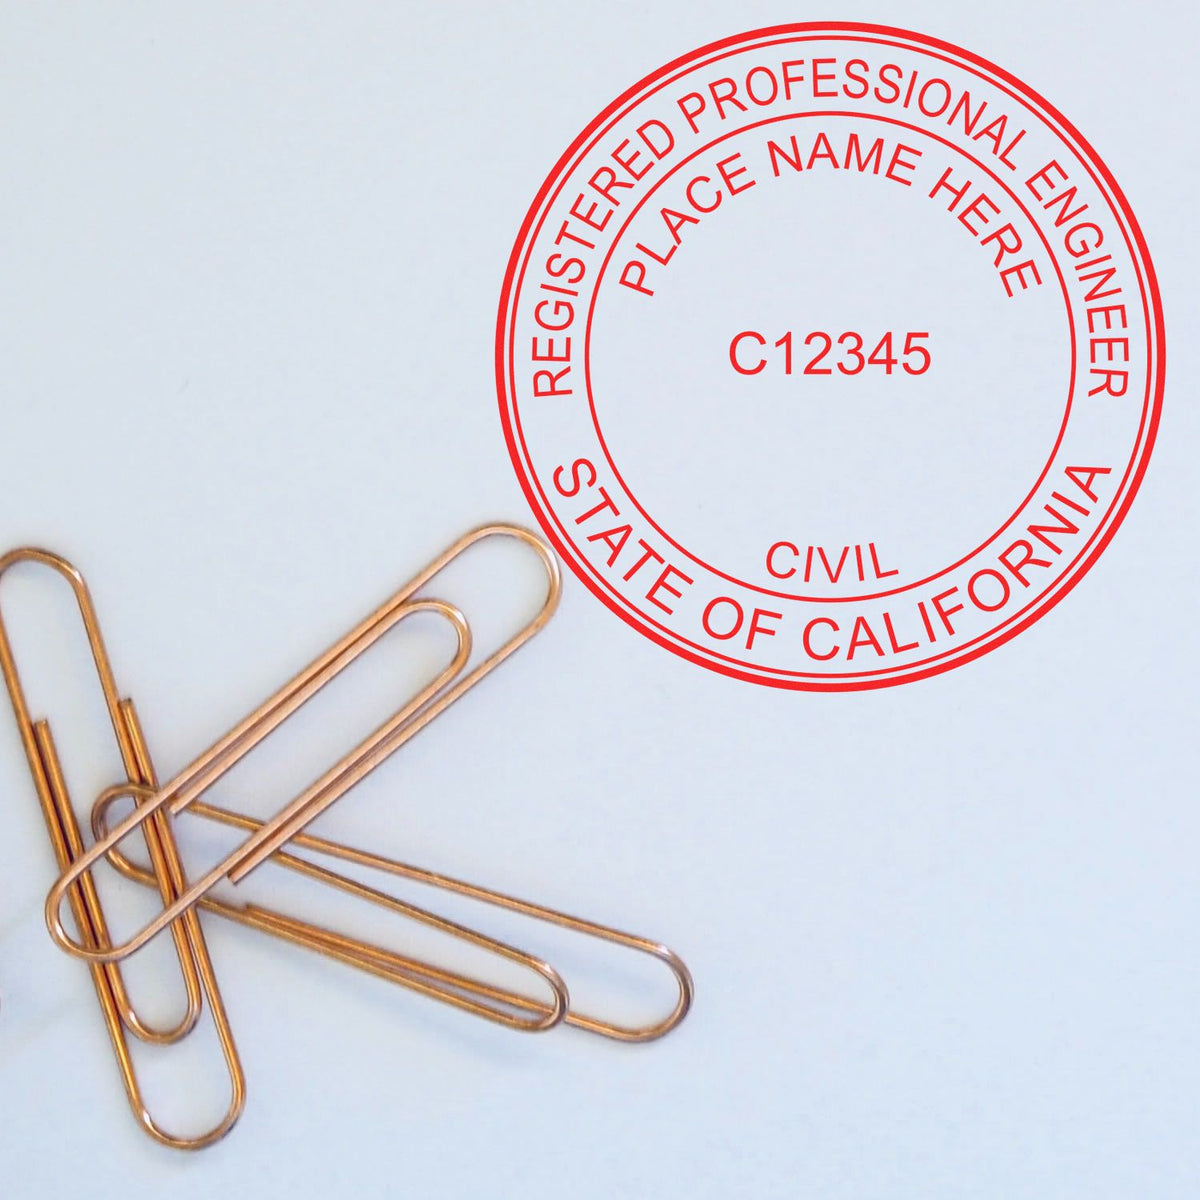 A photograph of the Slim Pre-Inked California Professional Engineer Seal Stamp stamp impression reveals a vivid, professional image of the on paper.